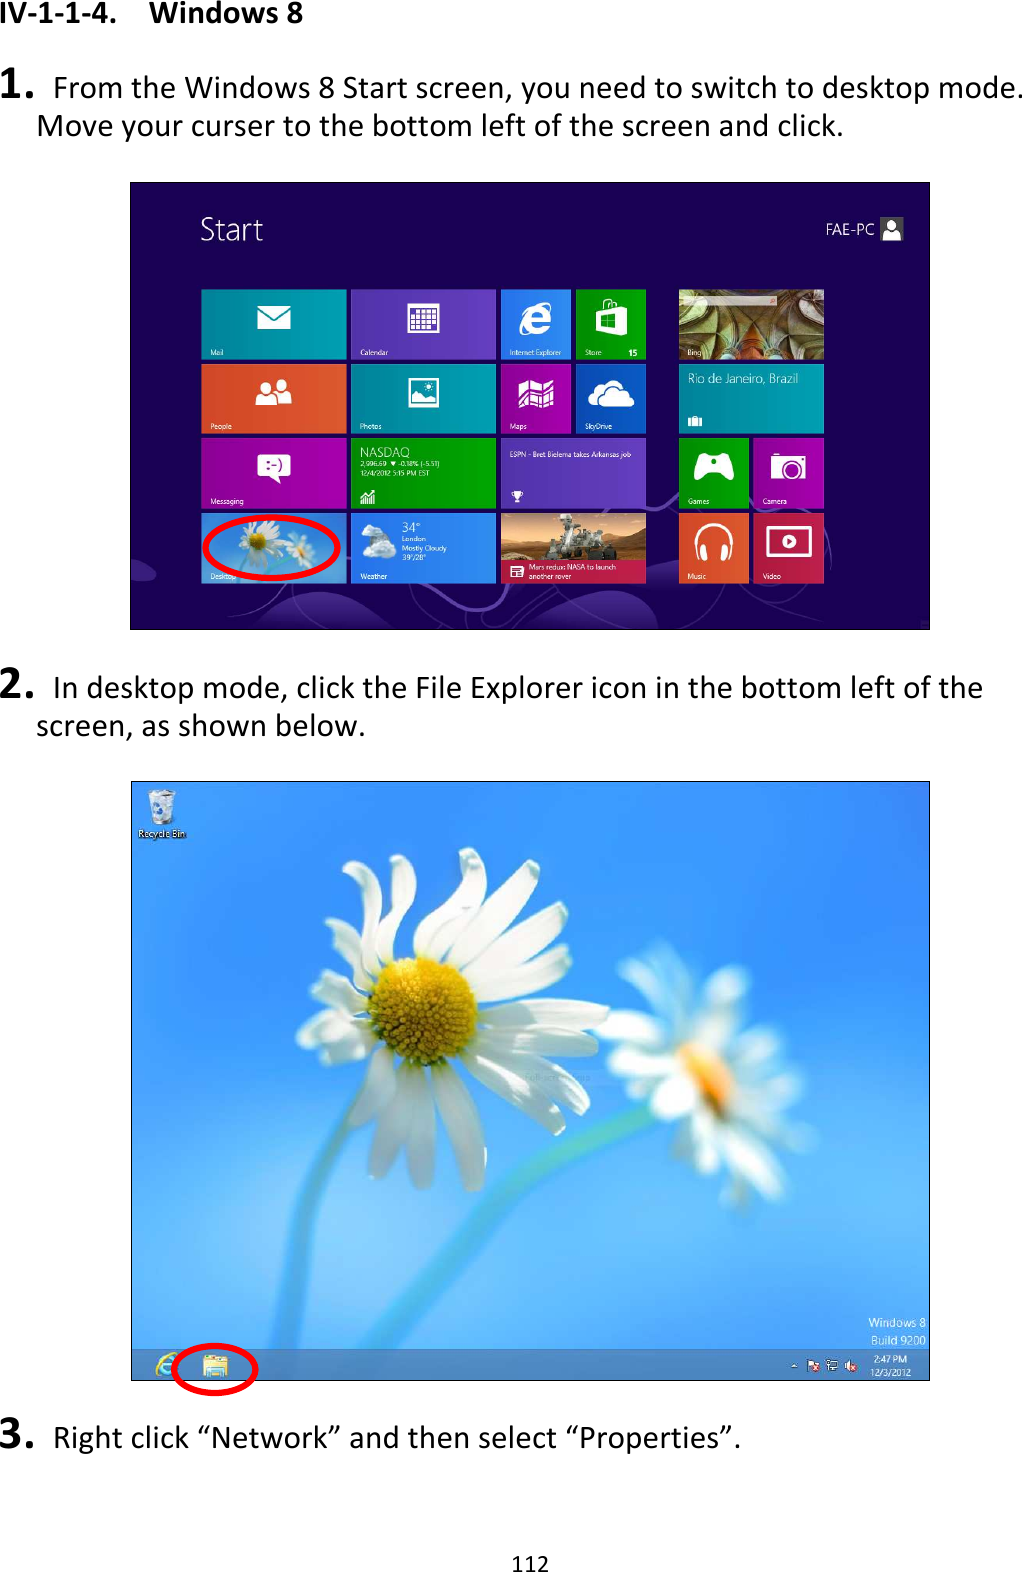 112 IV-1-1-4.  Windows 8  1.   From the Windows 8 Start screen, you need to switch to desktop mode. Move your curser to the bottom left of the screen and click.    2.   In desktop mode, click the File Explorer icon in the bottom left of the screen, as shown below.    3.   Right click “Network” and then select “Properties”.  